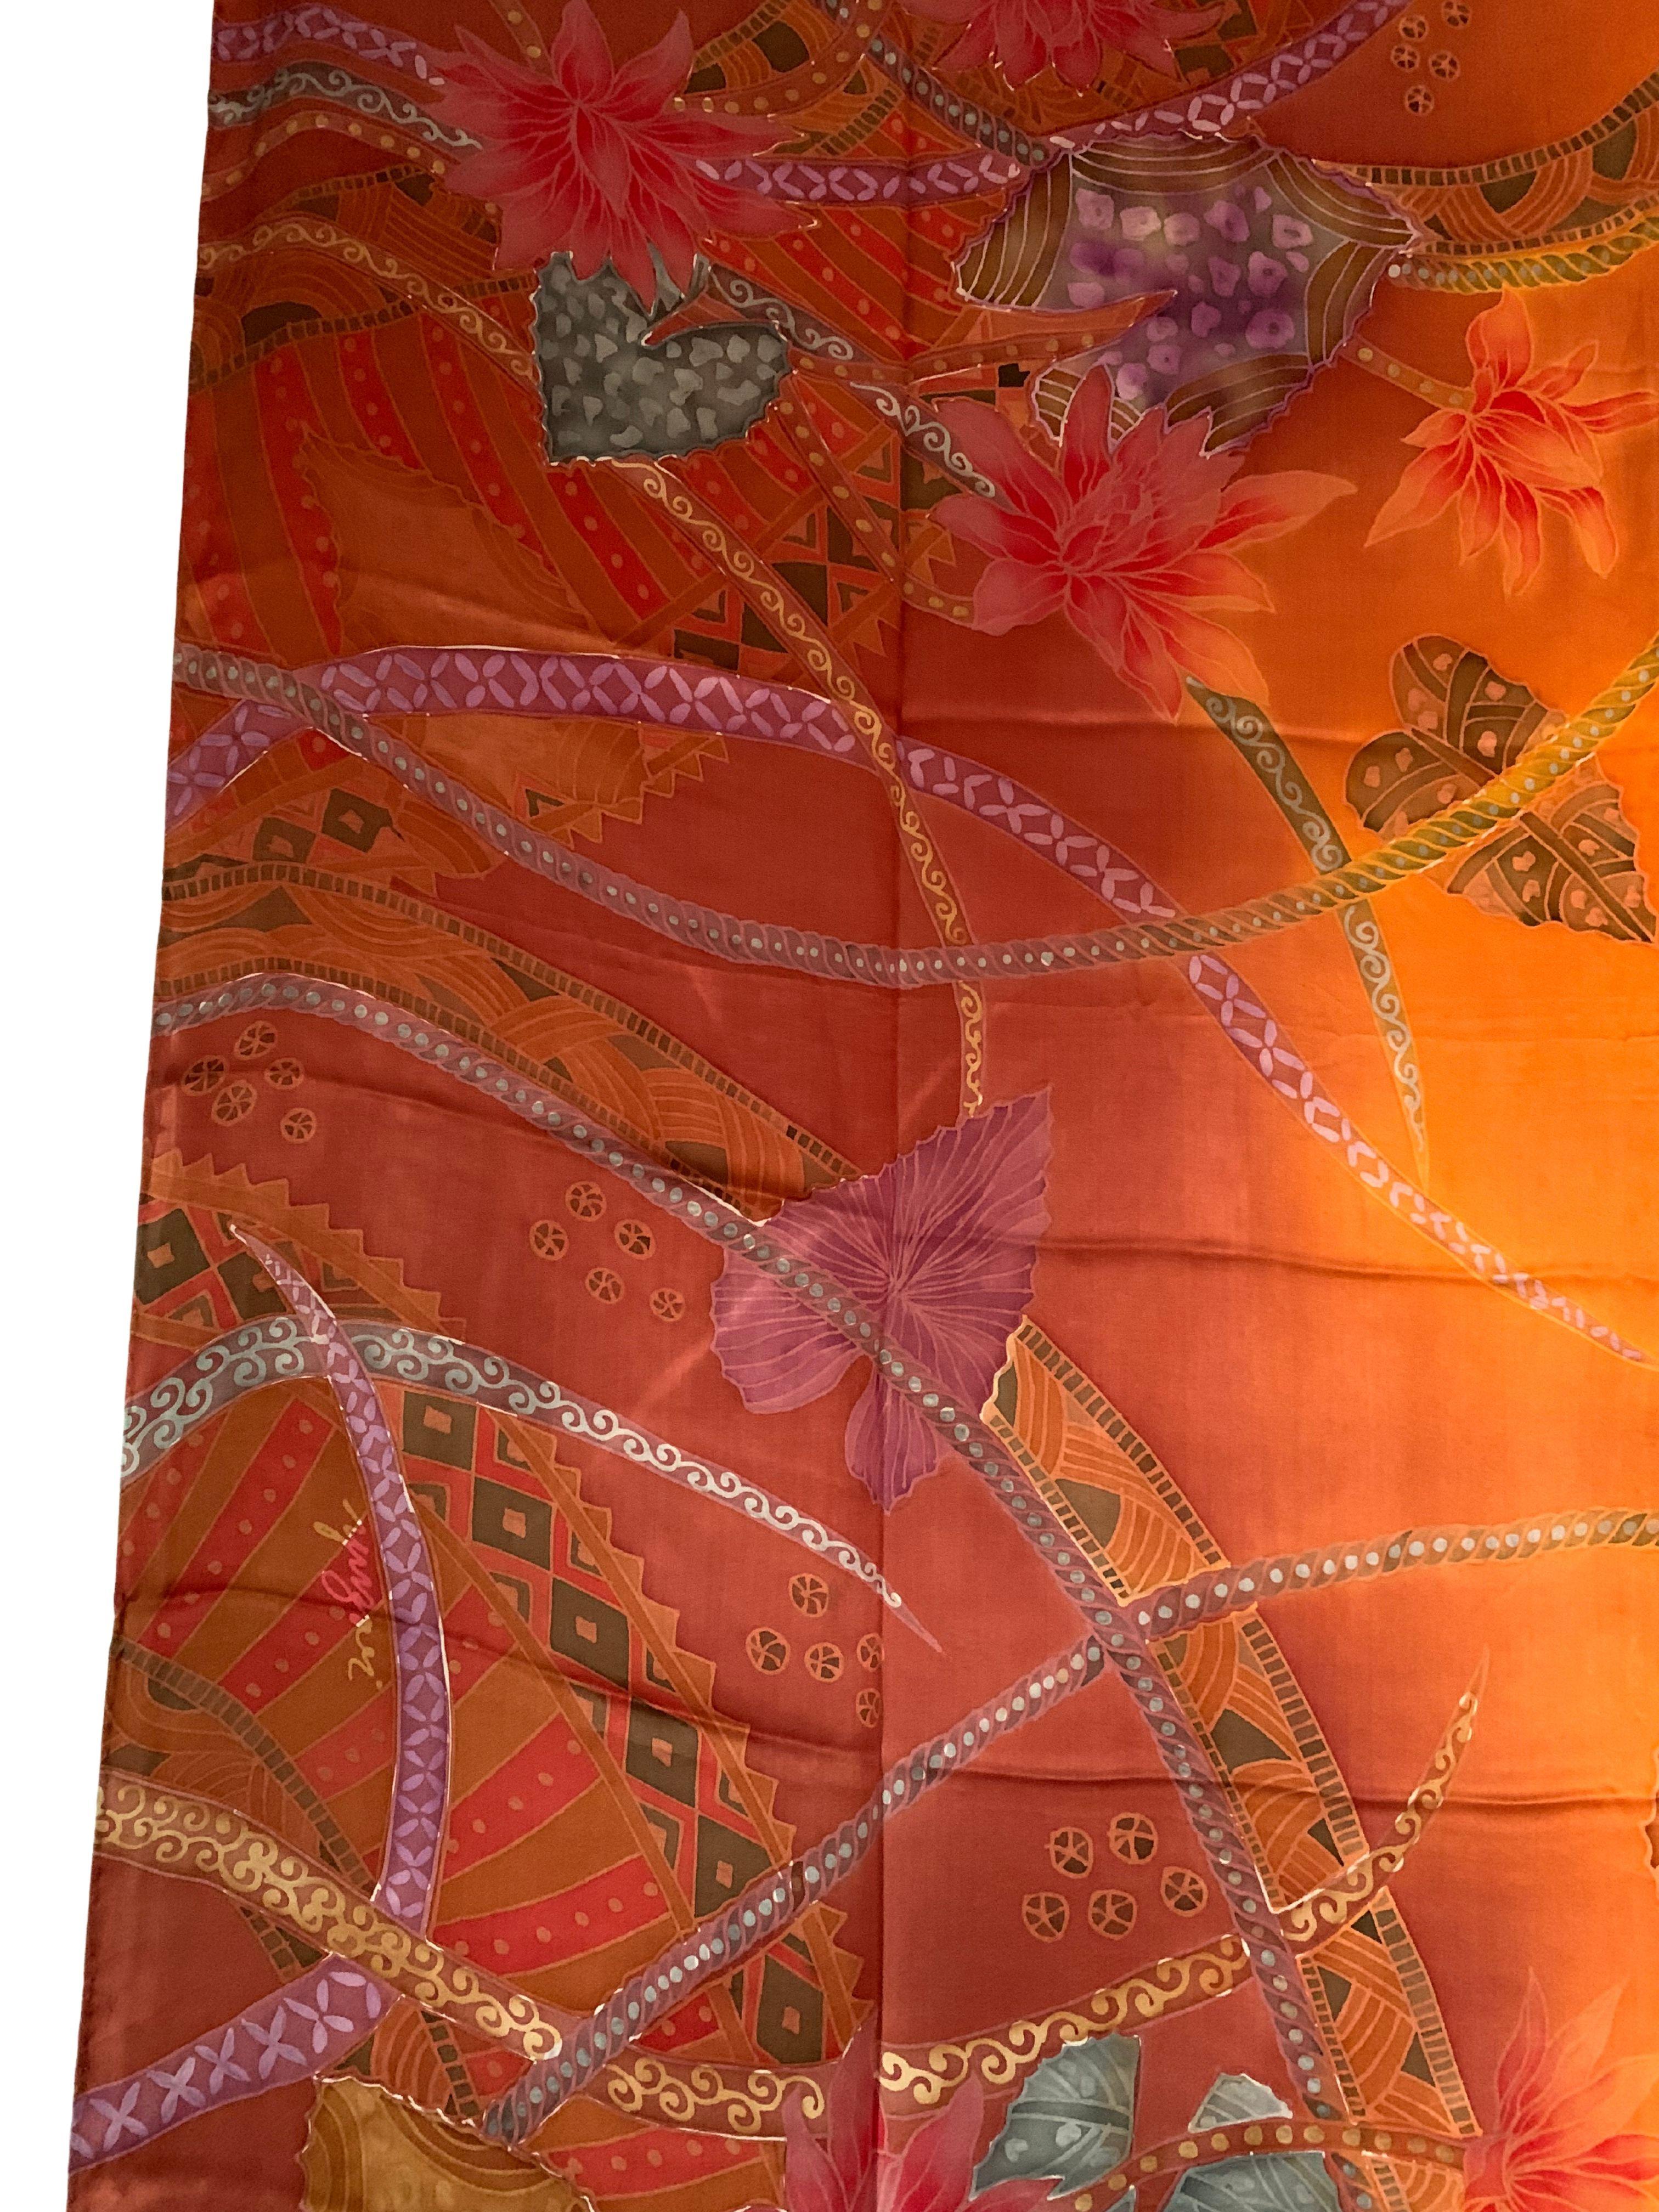 A wonderful Hand-Crafted Silk Textile from Malaysia with Stunning Detailing and shades. A wonderful decorative object to bring warmth and color to any space. This textile was hand-crafted by local weavers. 